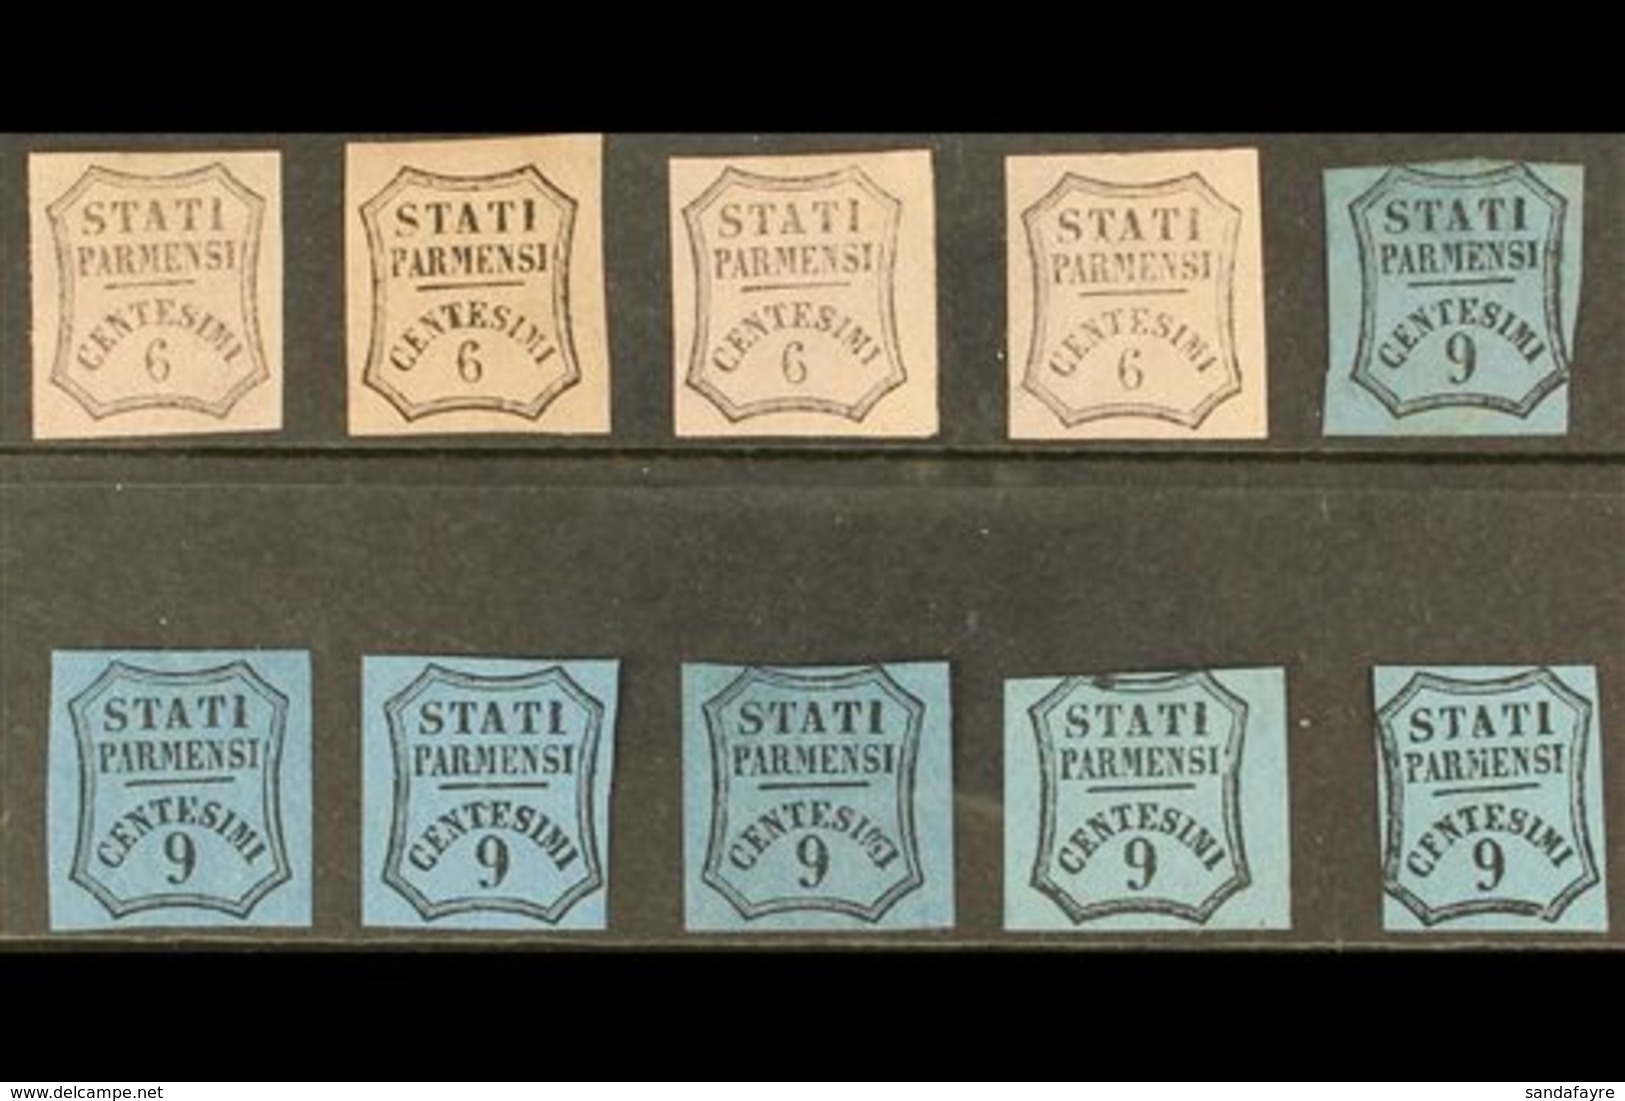 PARMA  NEWSPAPER STAMPS - 1853 - 7 Unissued 6c Black On Pale Rose (4) And 9c Blue (3) And Pale Blue (3) Including "CFN"  - Unclassified